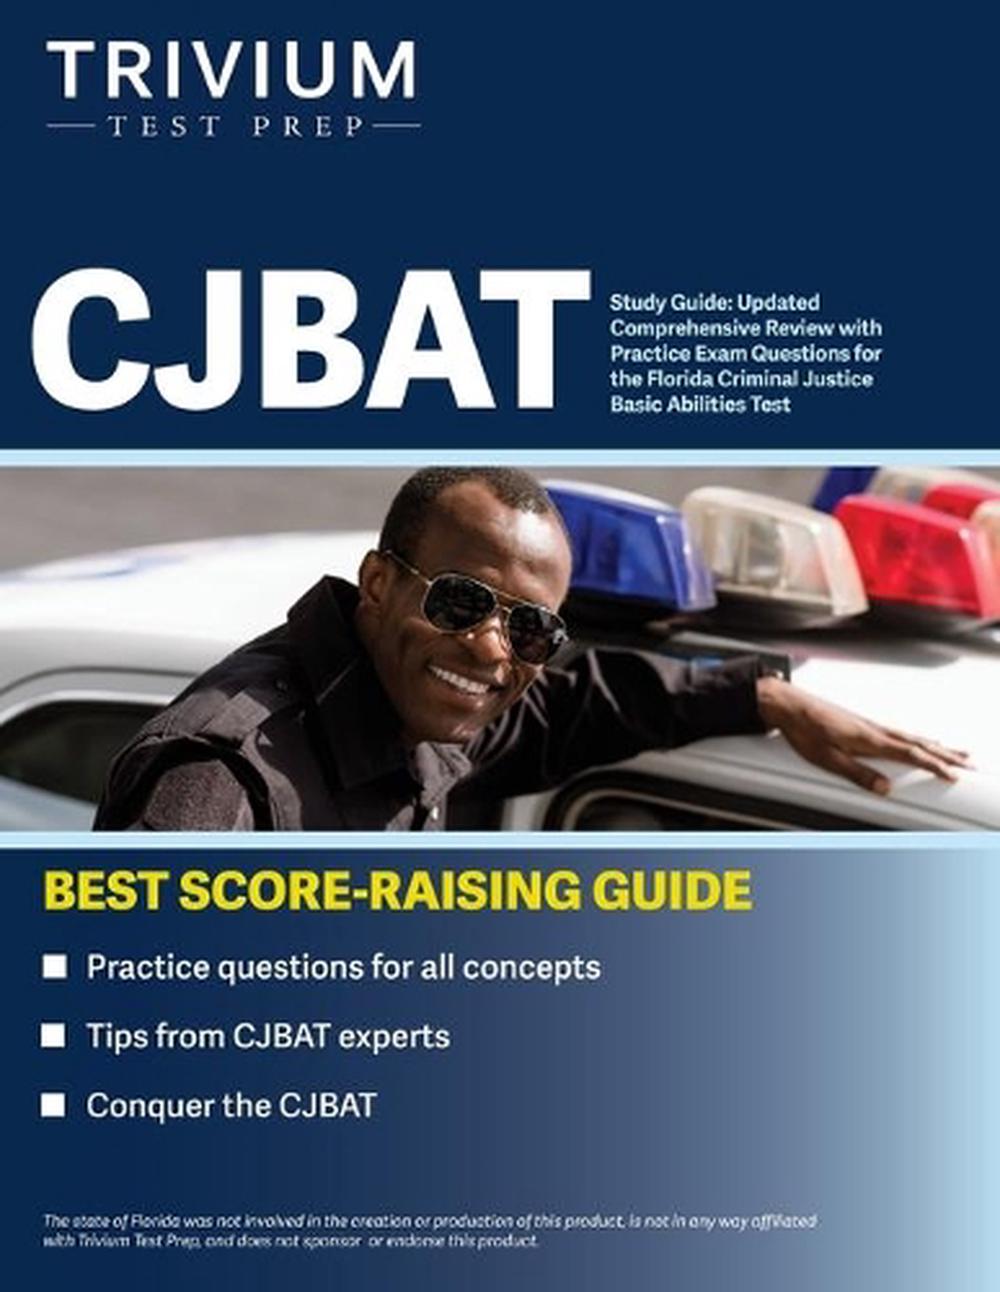 cjbat-study-guide-updated-comprehensive-review-with-practice-exam